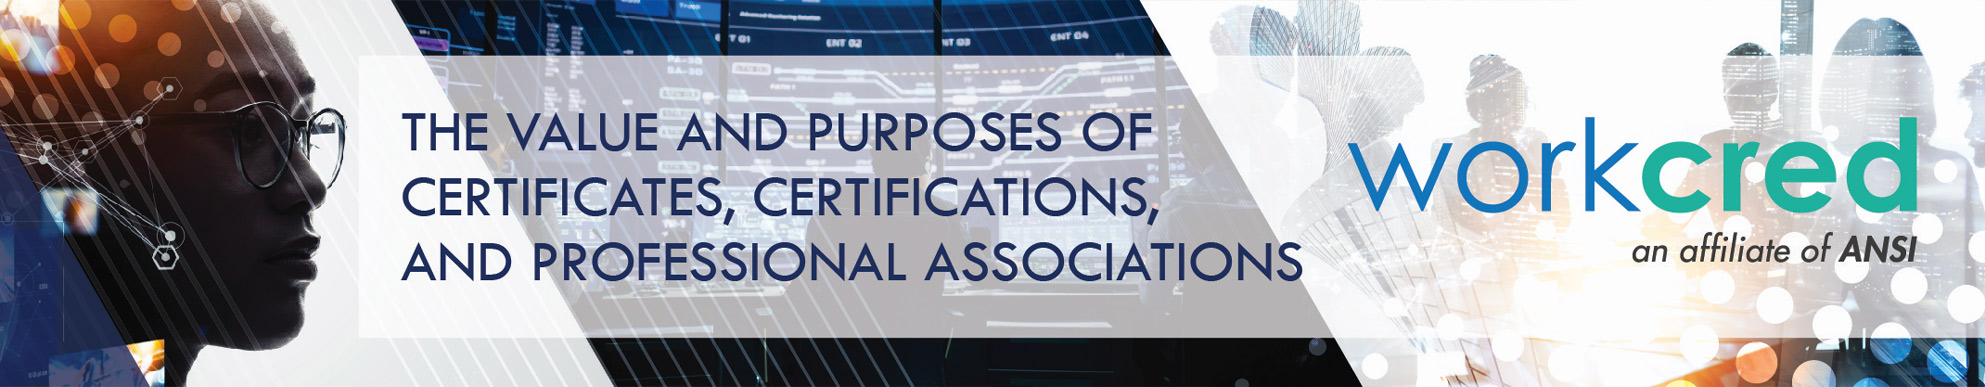 The Value and Purposes of Certificates, Certifications, and Professional Associations